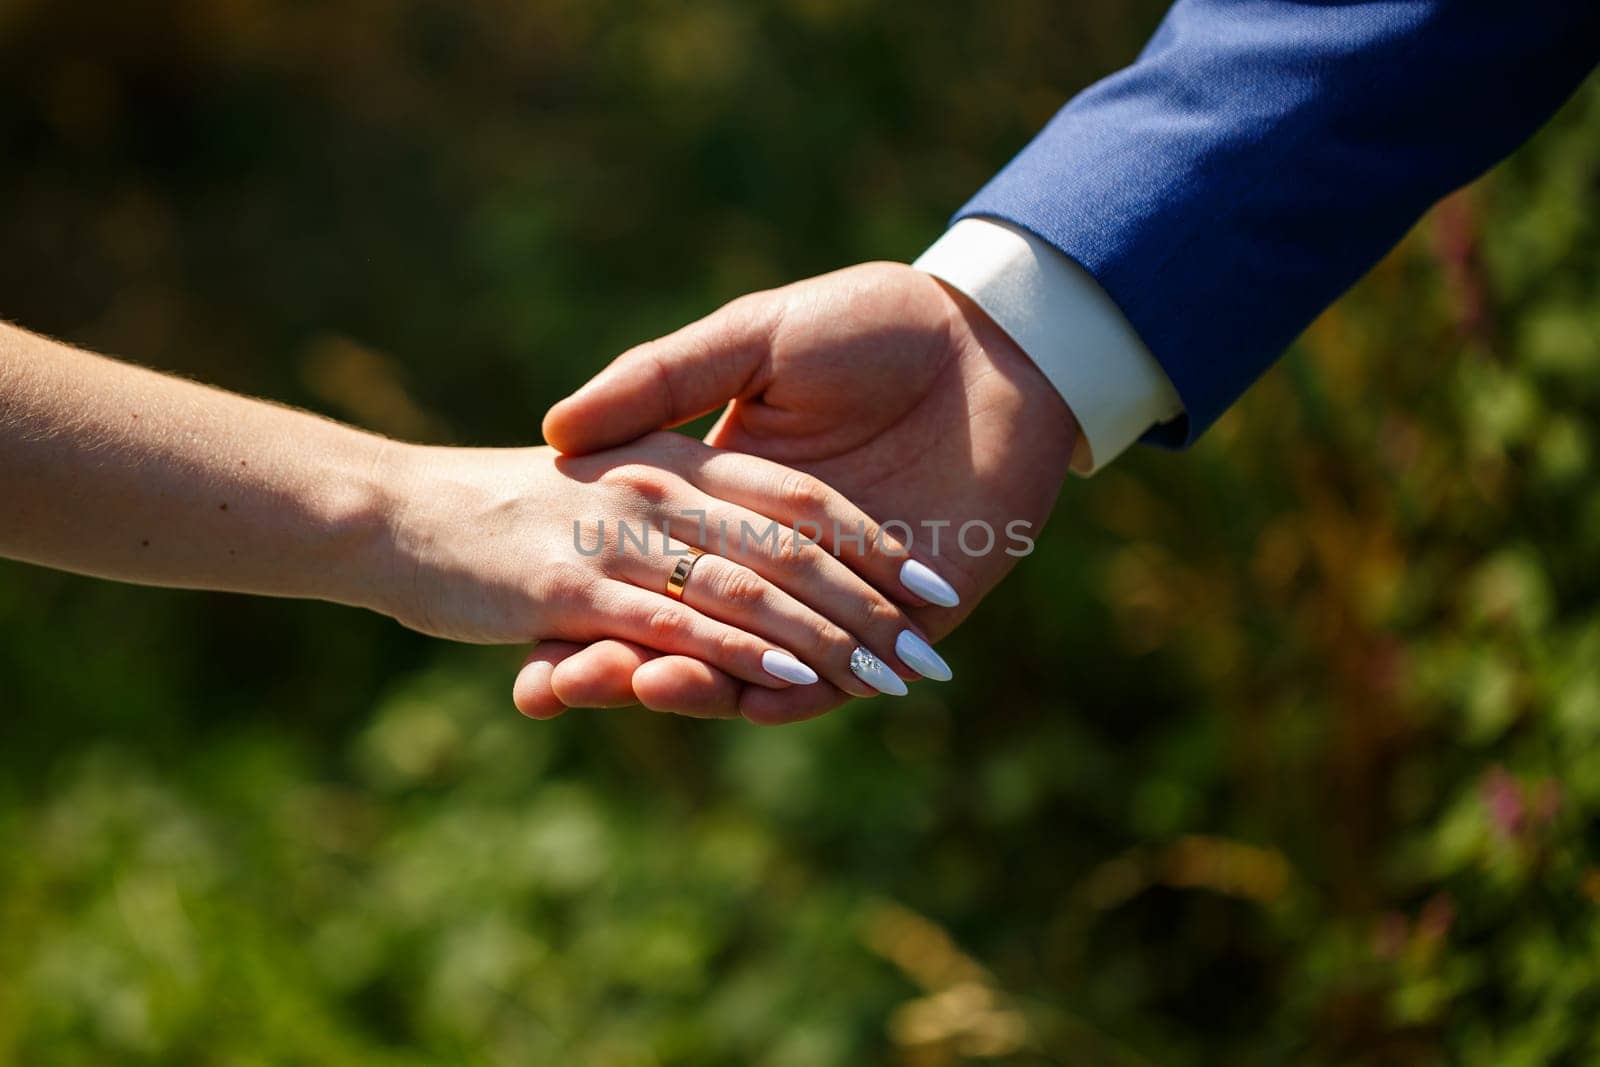 gold wedding rings in the hands of the newlyweds by Dmitrytph